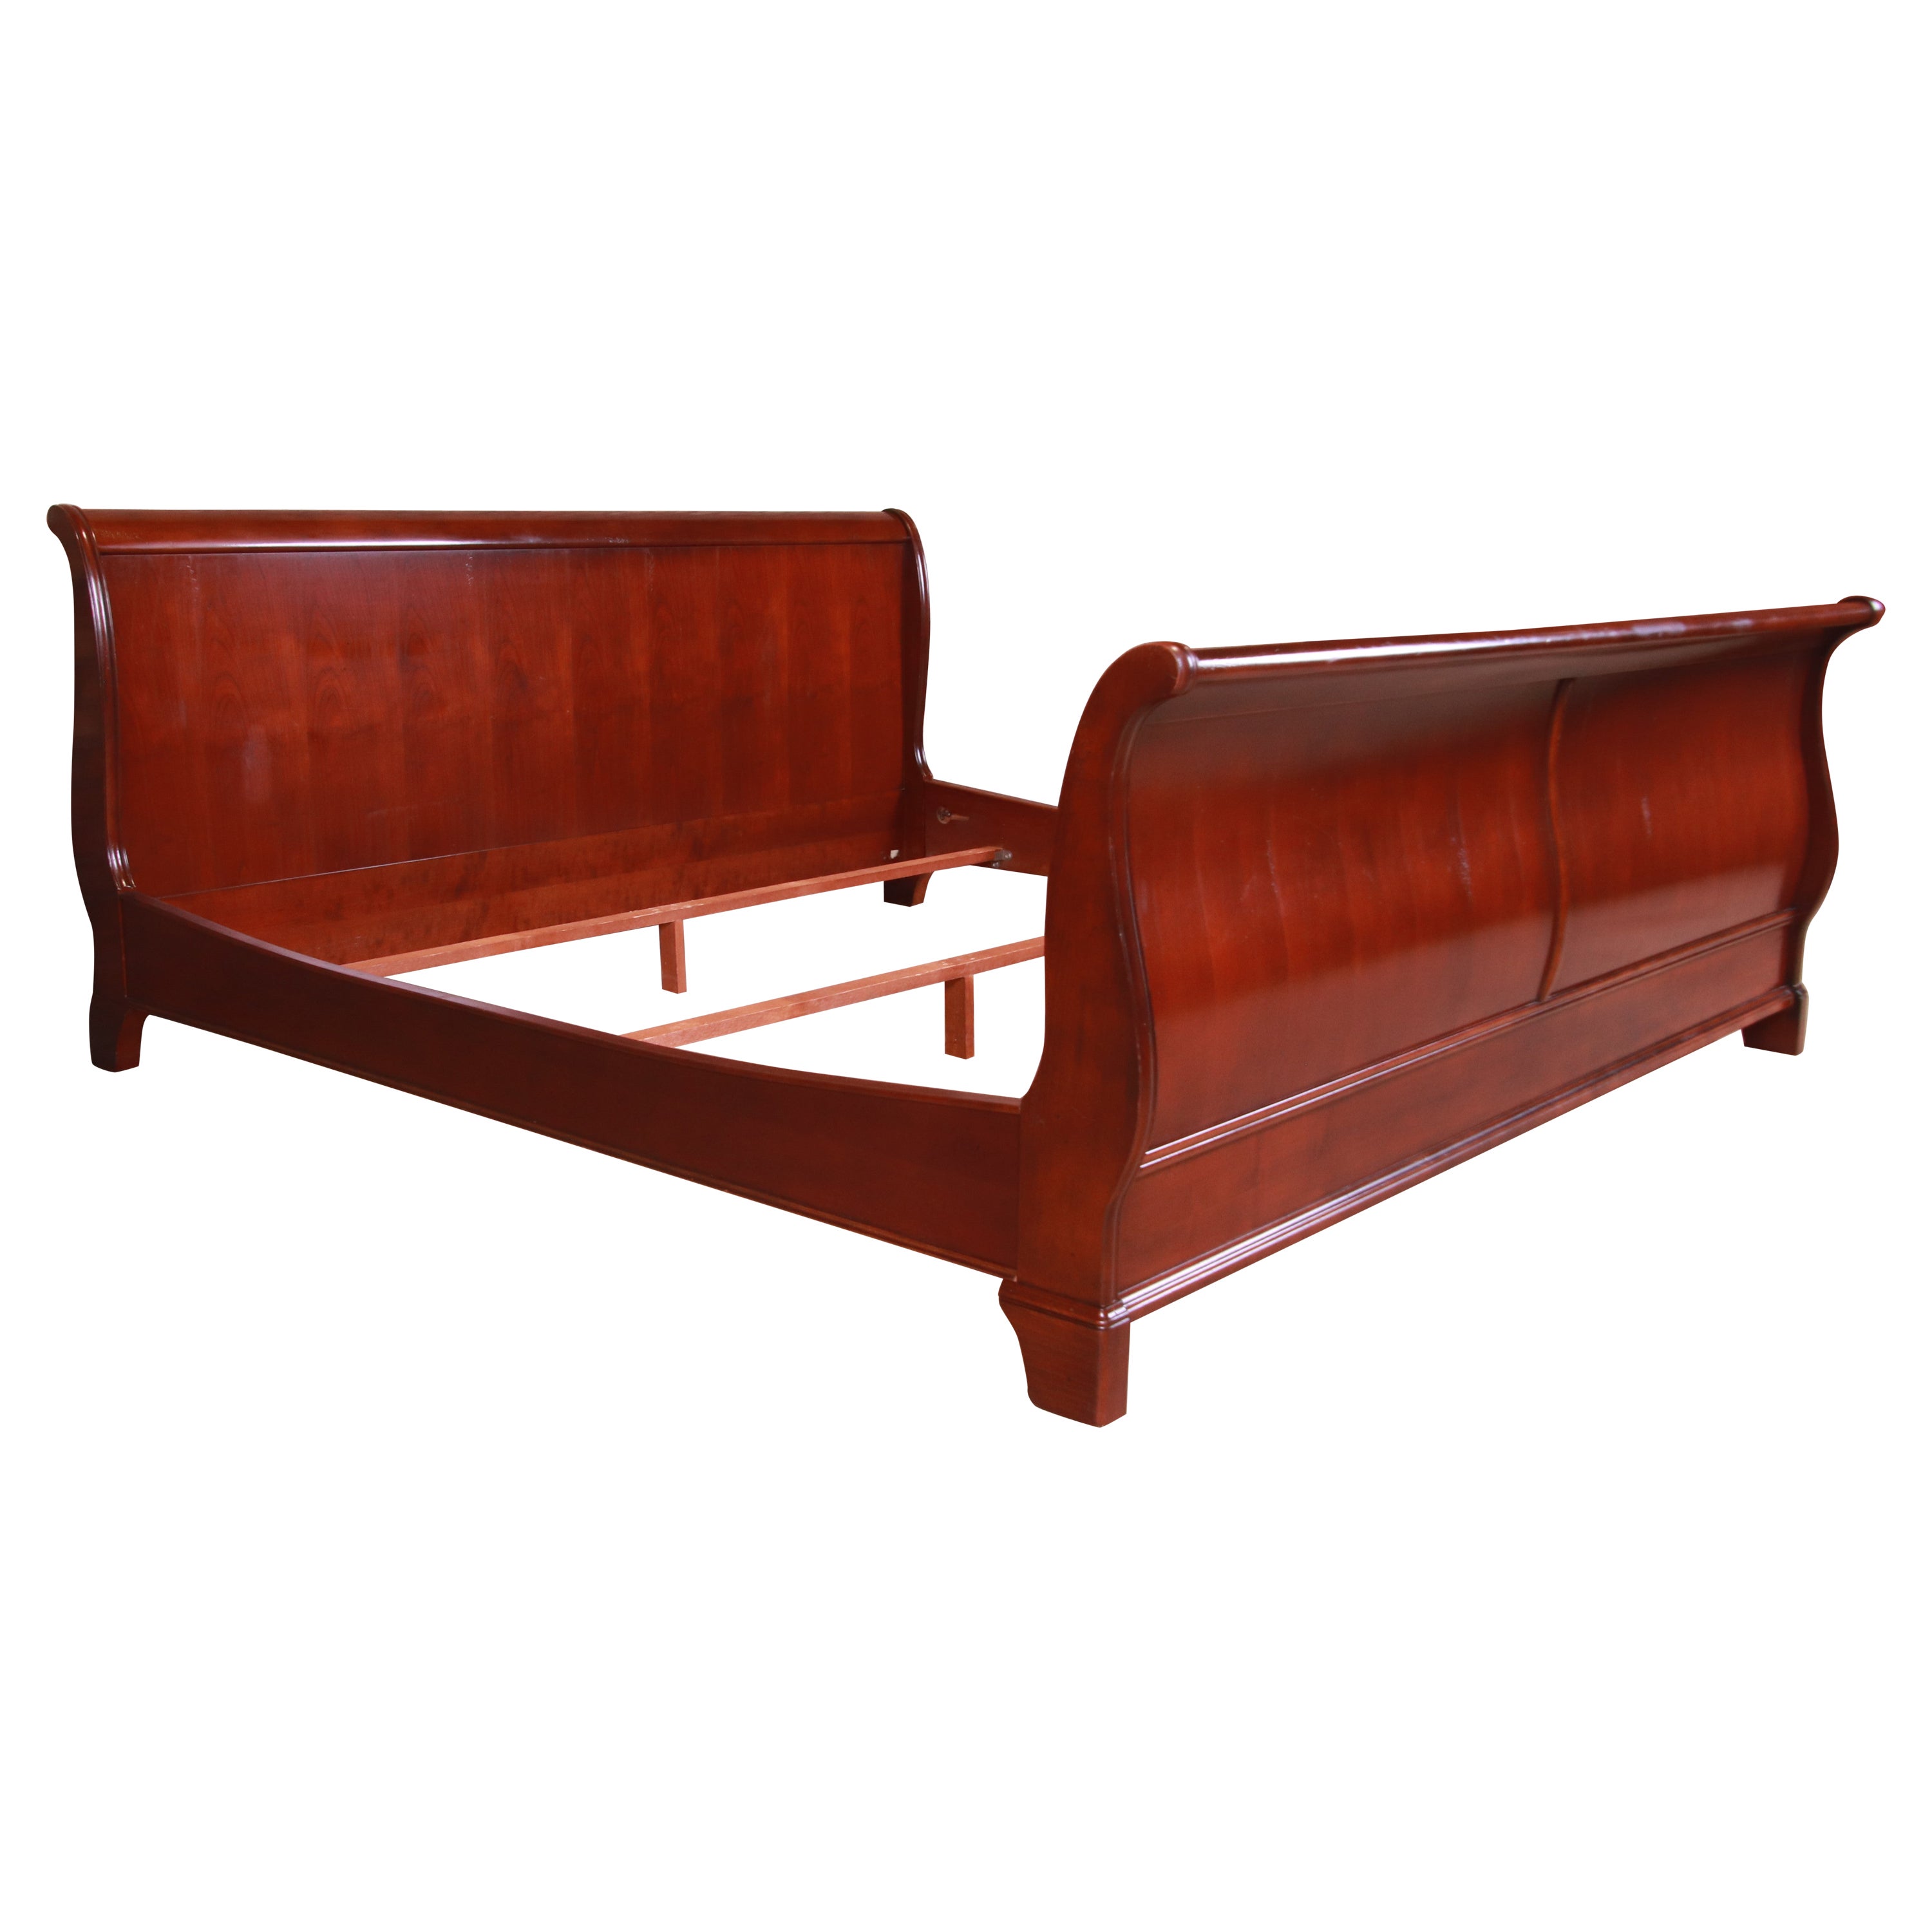 Louis Philippe Cherry Wood King Size, Wooden Sleigh Bed King Size With Storage